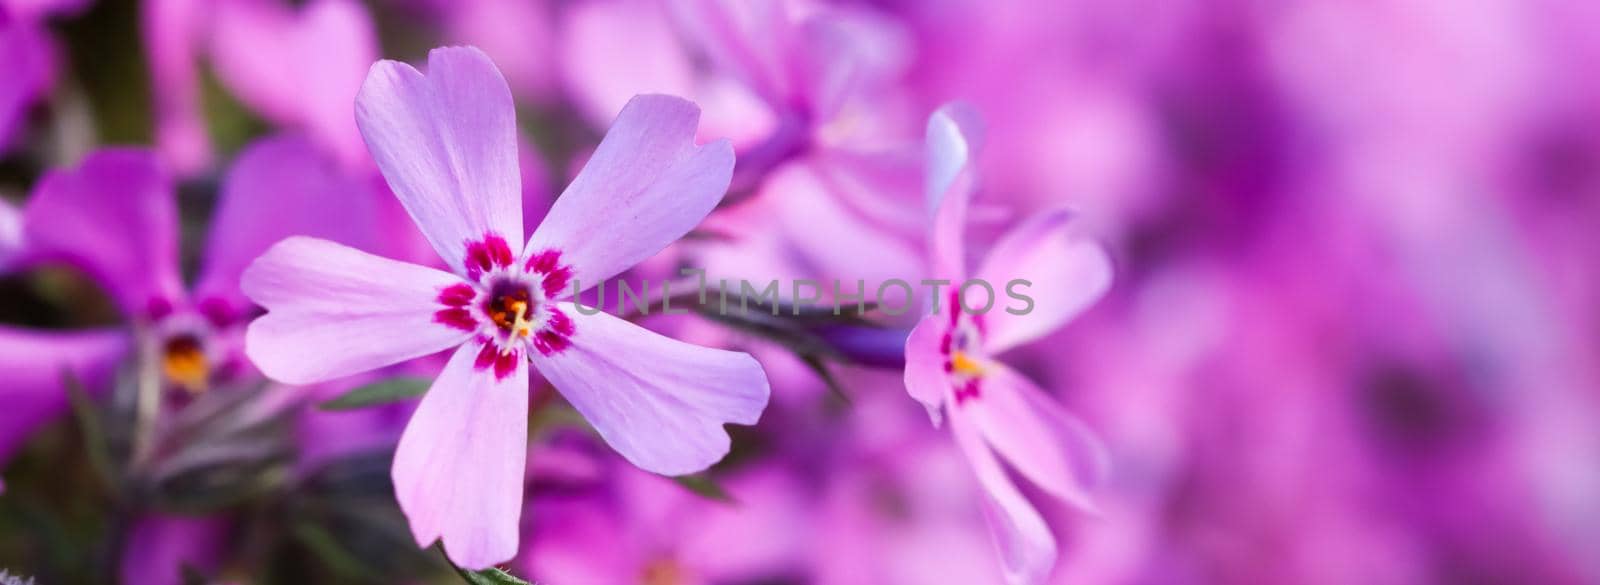 Pink flowers of Creeping Phlox in spring. Floral background.